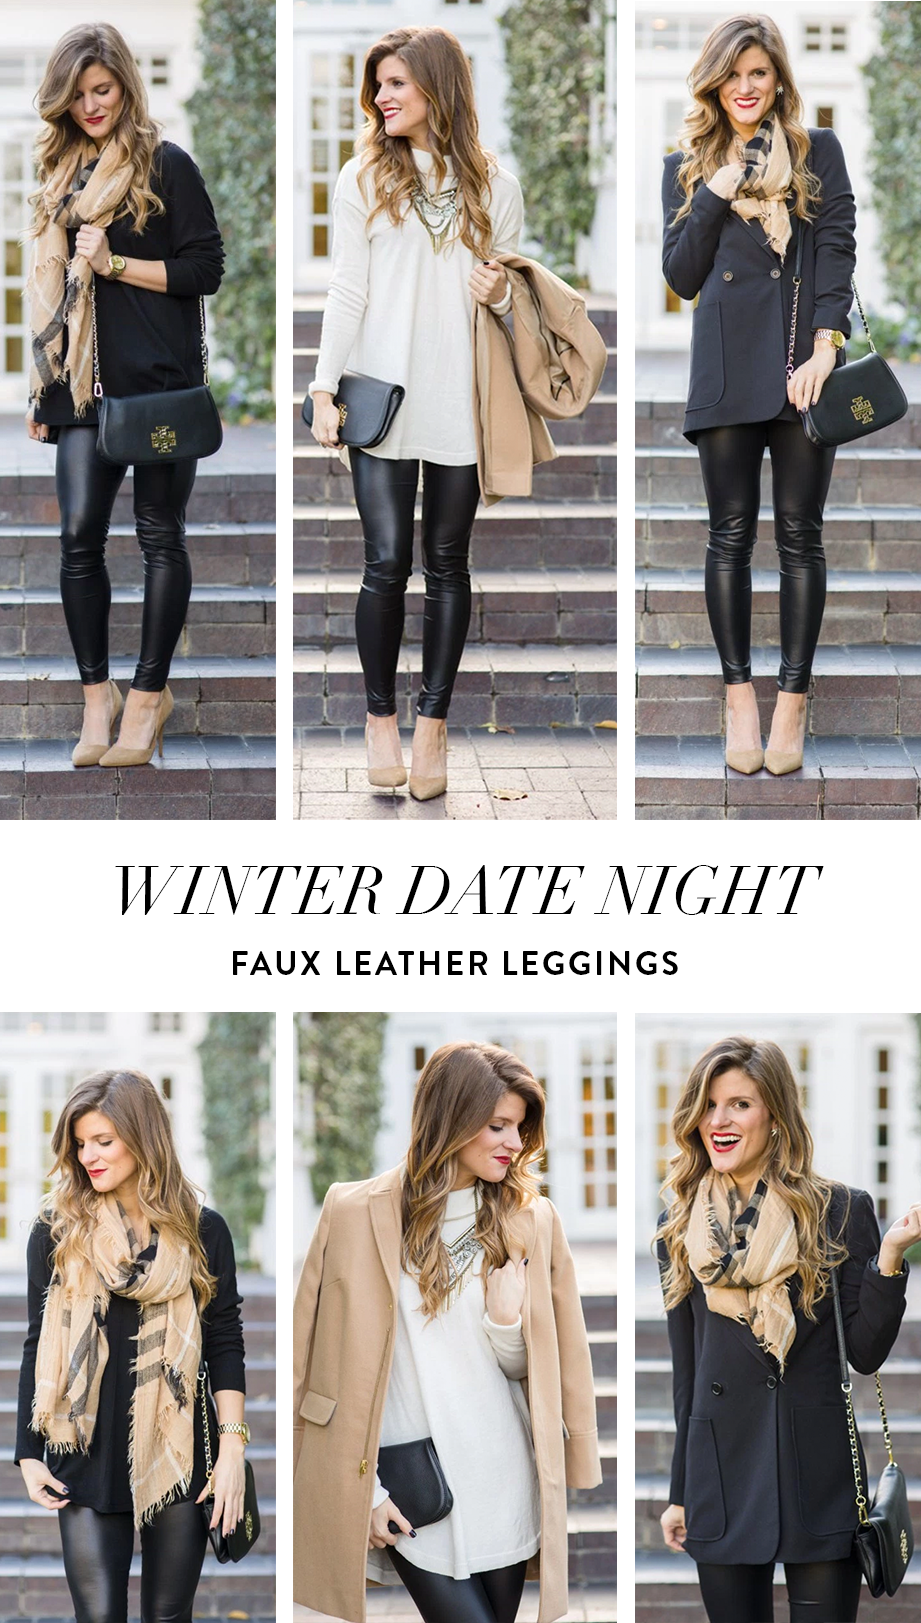 faux leather leggings outfit